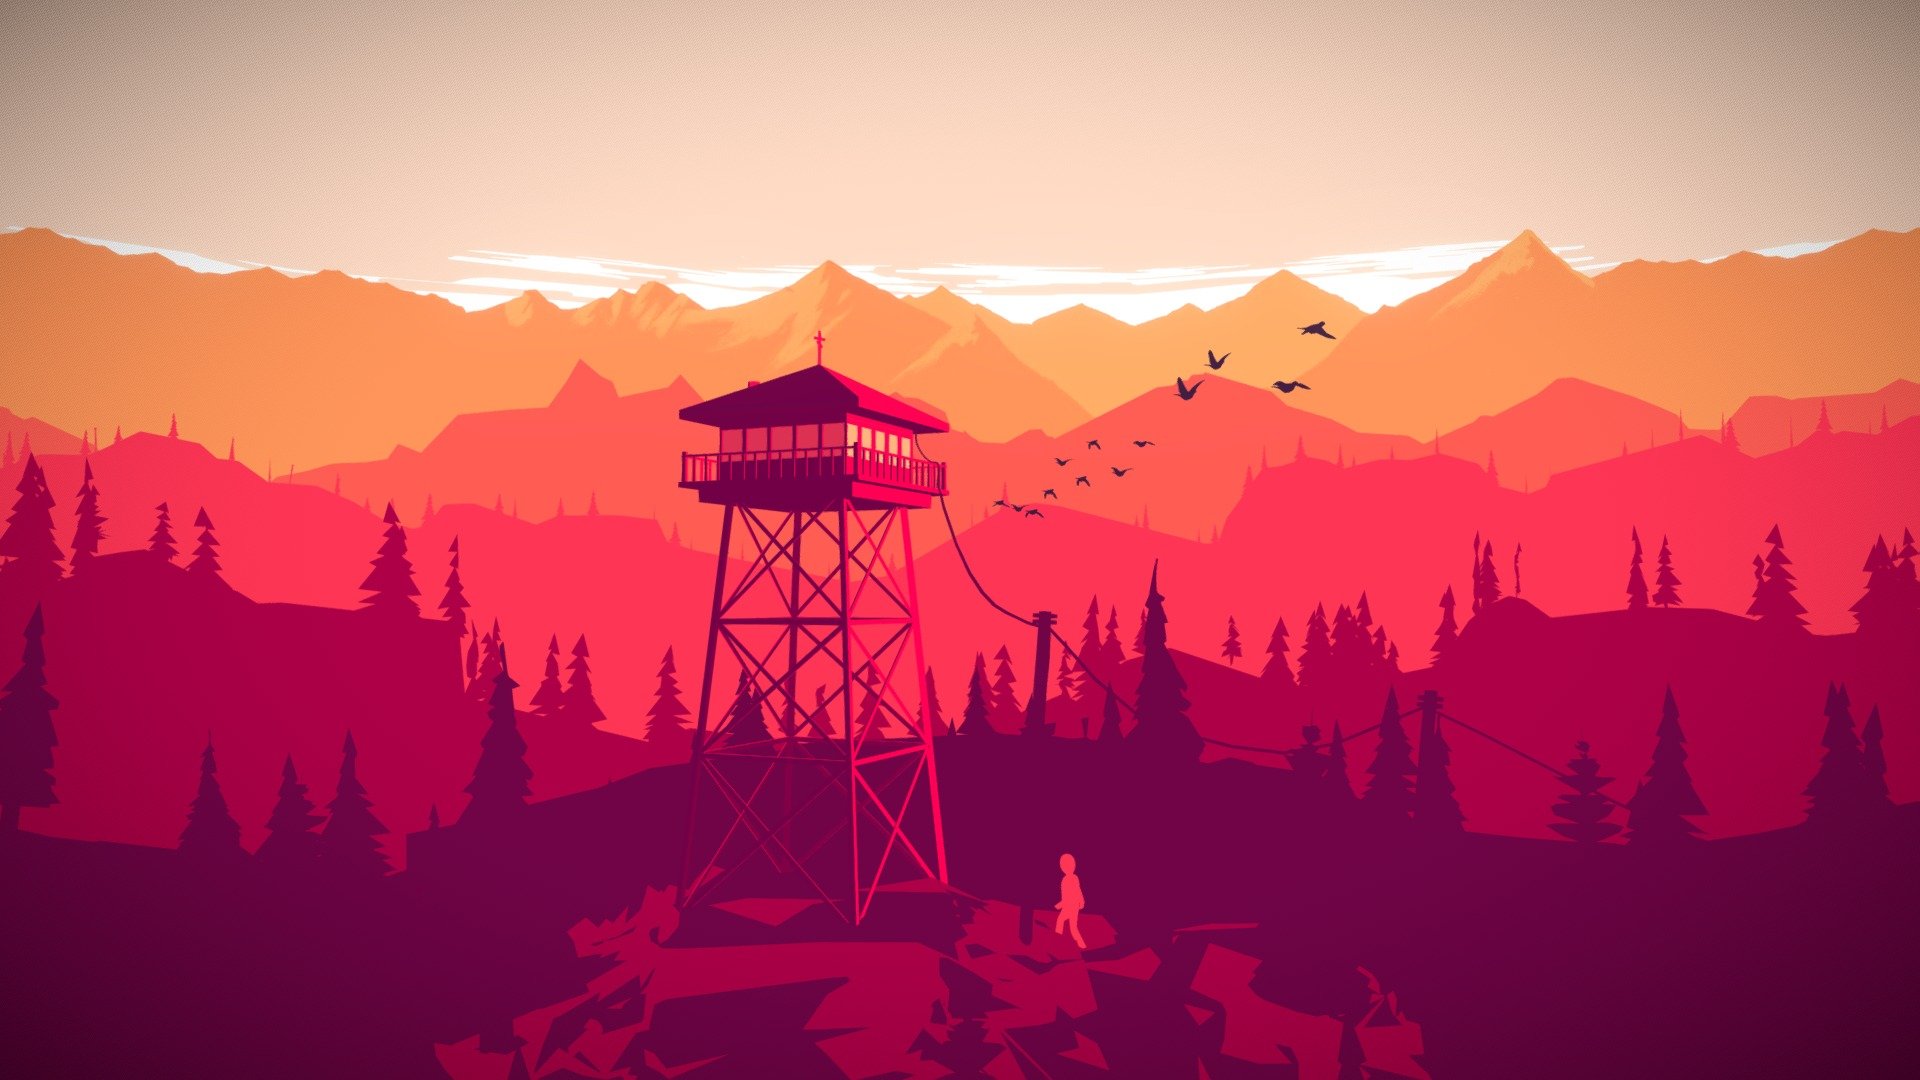 A piece of fan art I did while I am awaiting the upcoming release of Firewatch, by Campo Santo. 
Original Concept art by Olly Moss can be seen at:
www.firewatchgame.com

You can also see my Sketchfab Artist Spotlight Tutorial here:
sketchfab.com/blogs/community/art-spotlight-firewatch-fan-art - Firewatch Fan Art - Buy Royalty Free 3D model by tzeshi (@timvizesi) 3d model